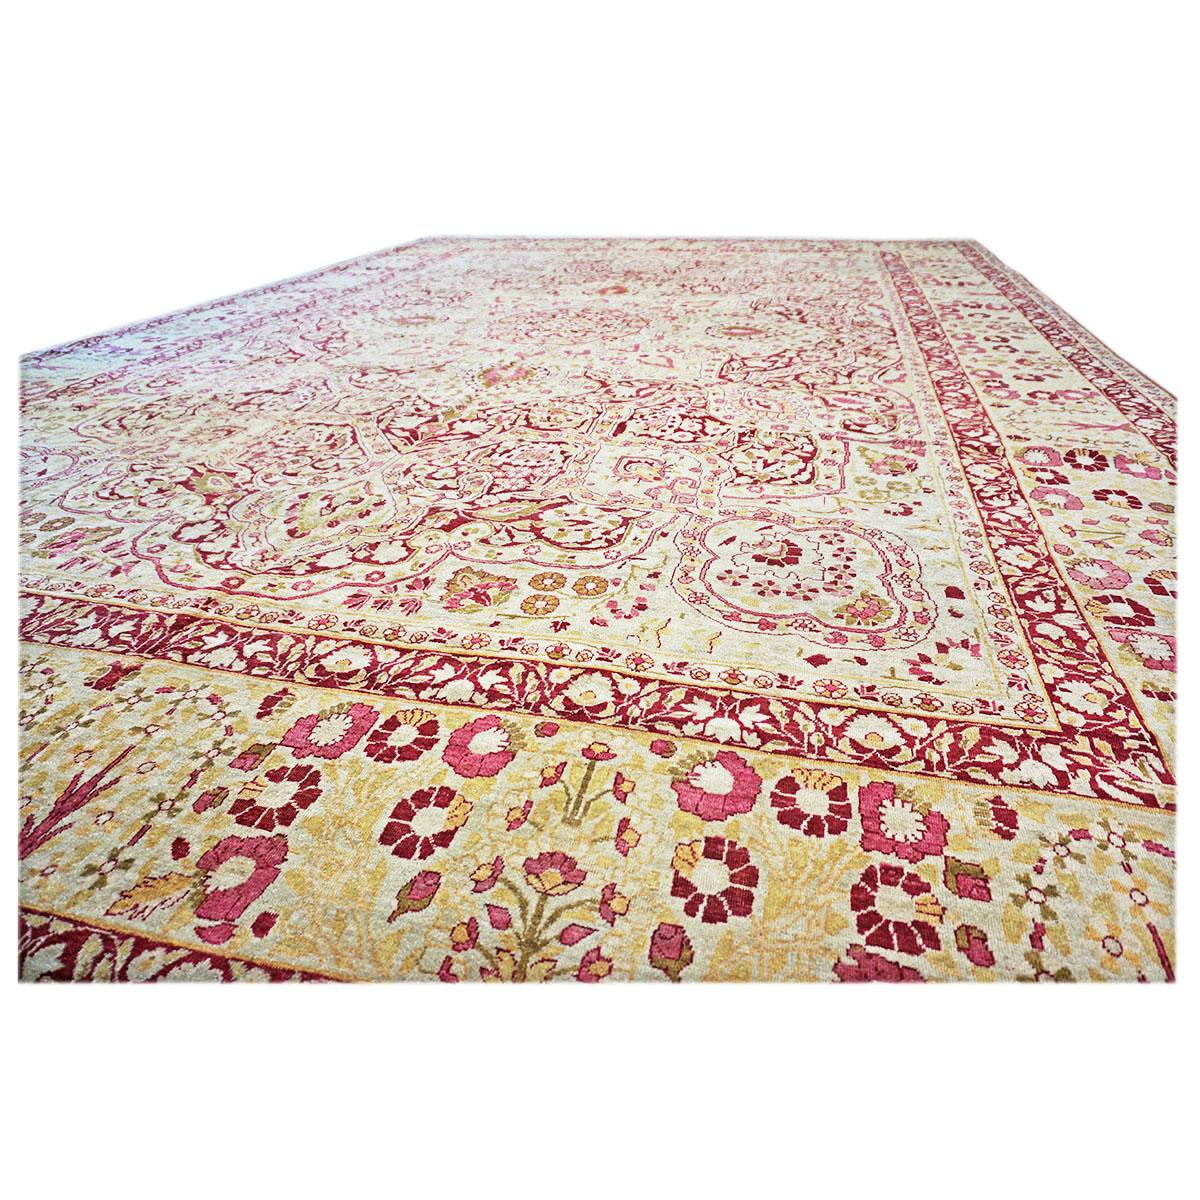 Hand-Woven 19th Century Antique Persian Kerman Lavar 10x16 Pink & Ivory Handmade Wool Rug For Sale